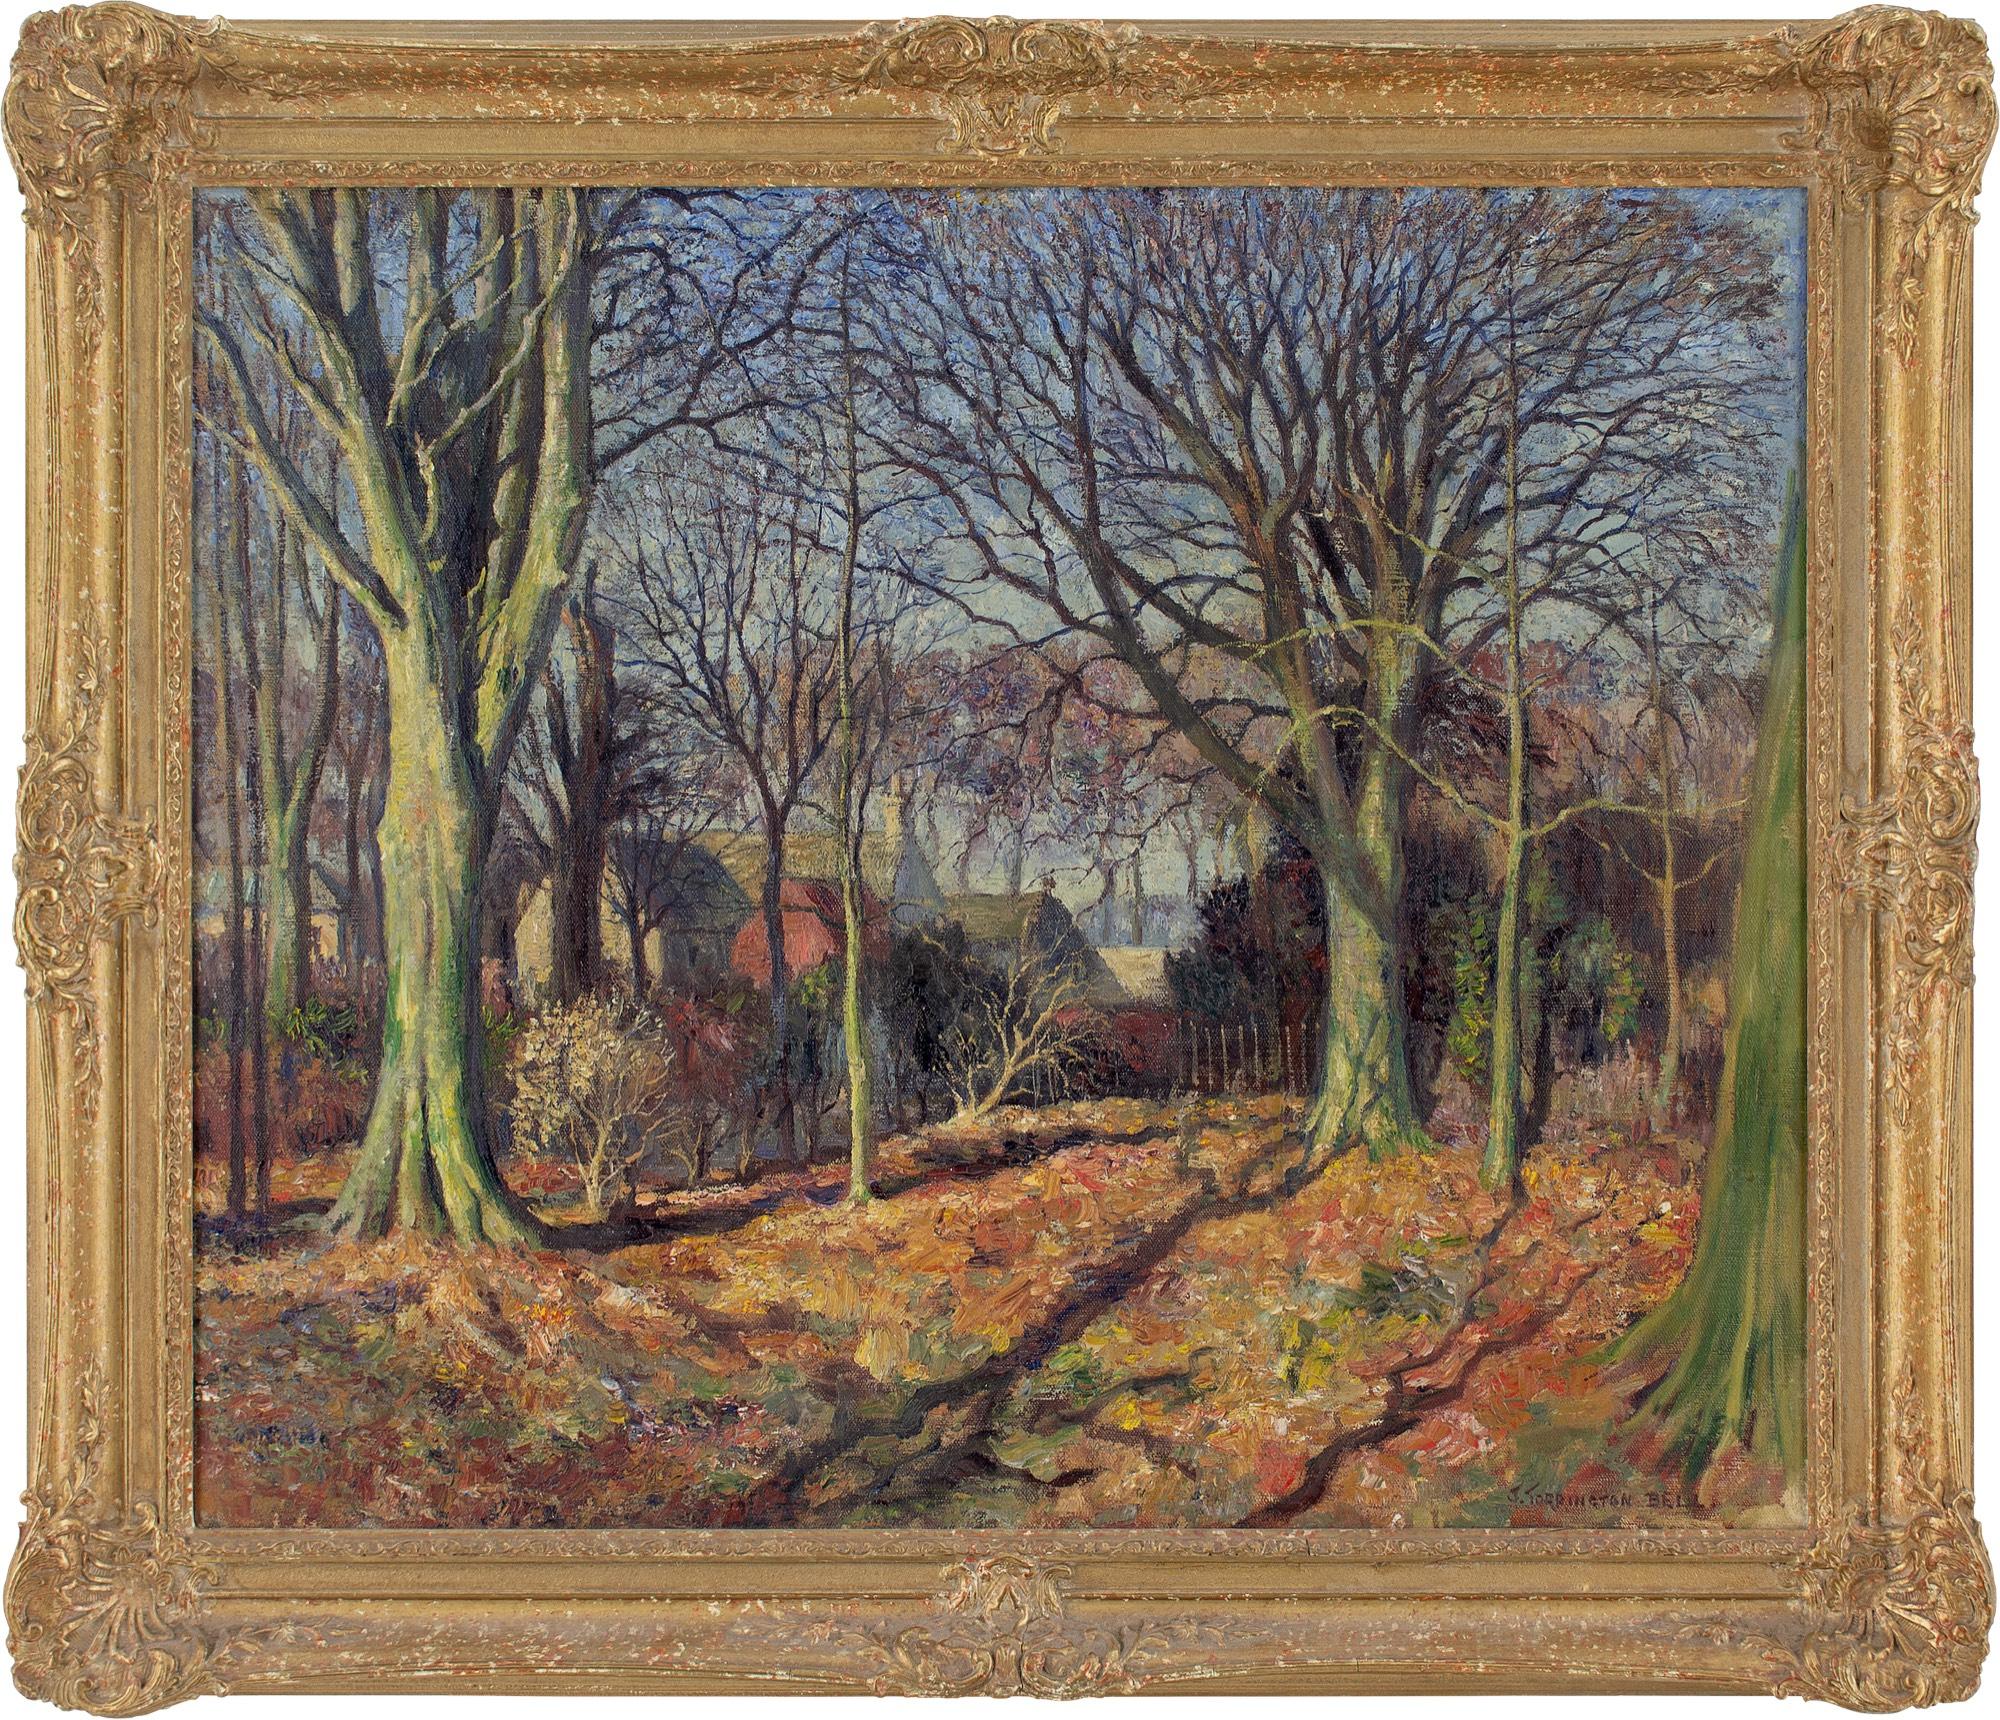 This mid-20th-century oil painting by Scottish artist James Torrington Bell (1892-1970) depicts a wooded view in Autumn with nearby dwellings. It’s a picturesque scene, which evokes the crunch of golden leaves and the sprawl of long shadows.

James